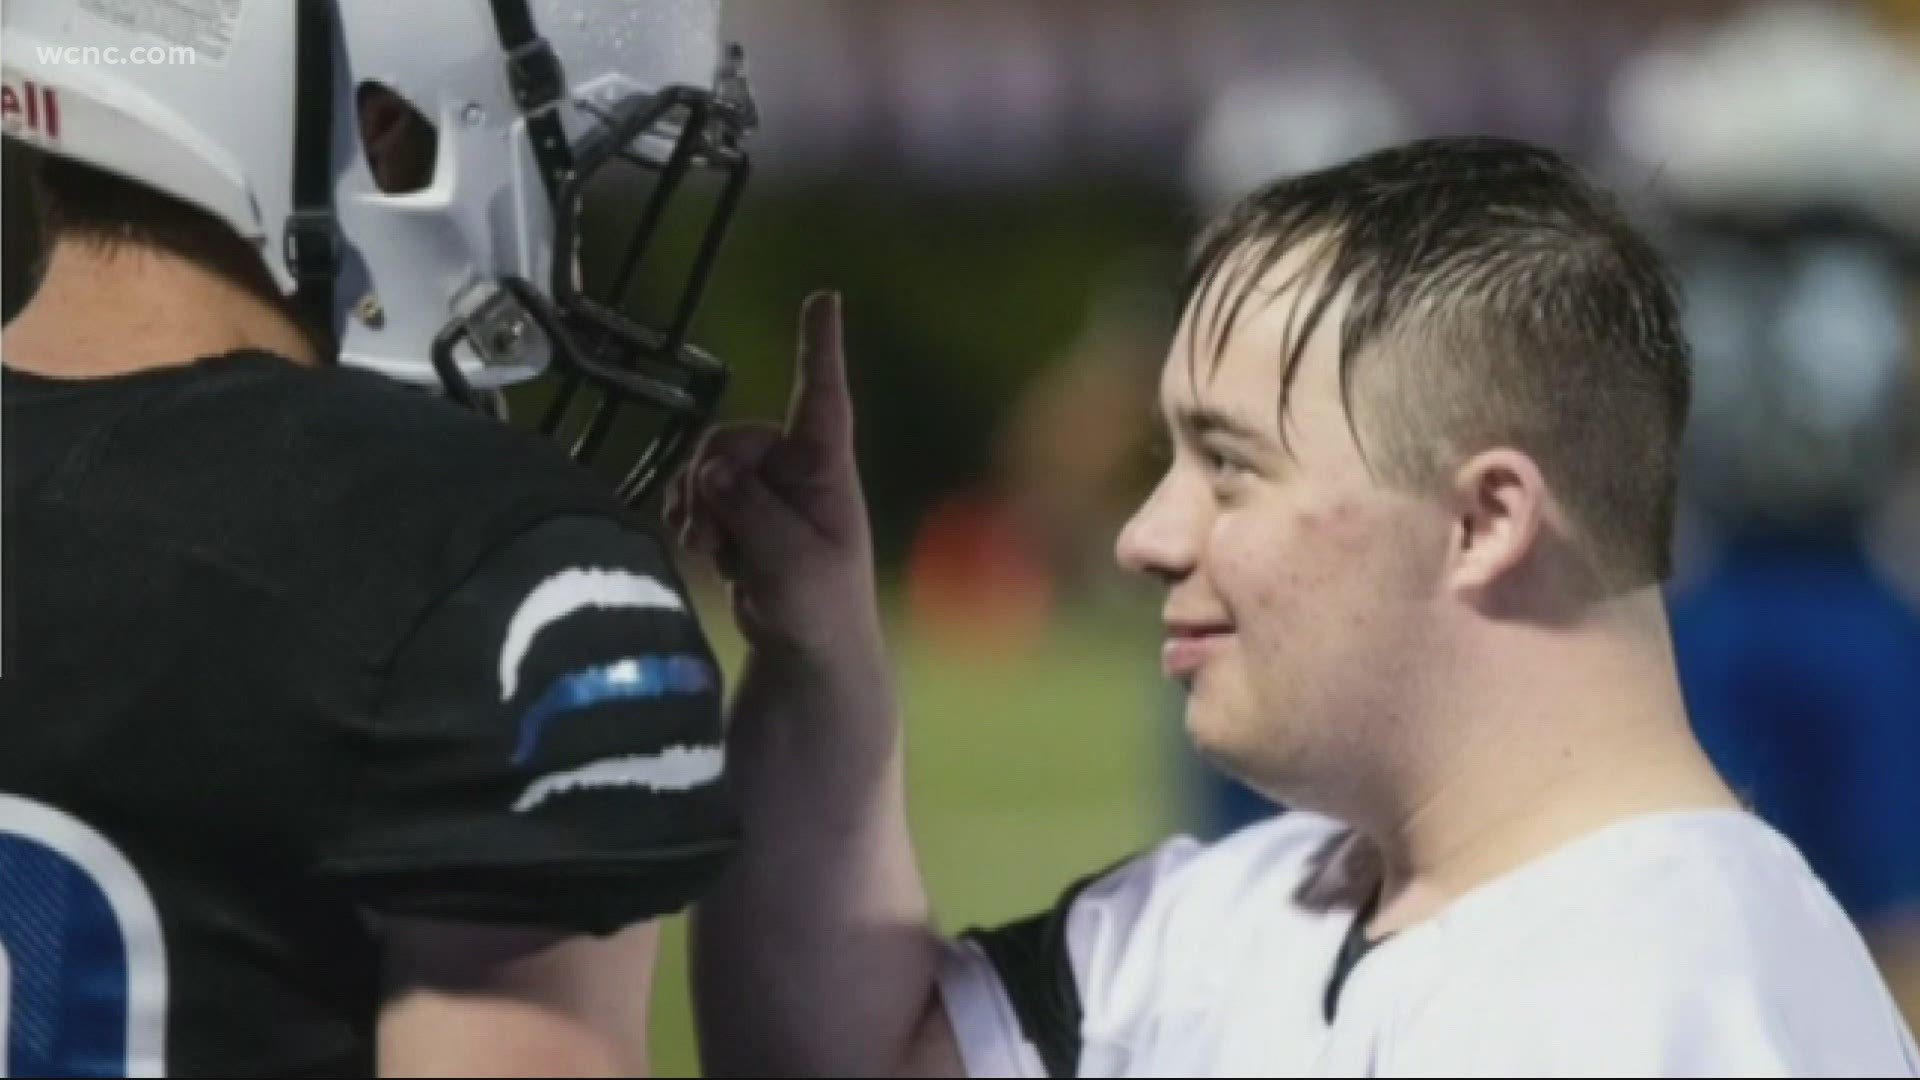 Sam "the man" has Down syndrome. He is 19 years old and has been helping and supporting his teammates since his freshman year at Lake Norman High.